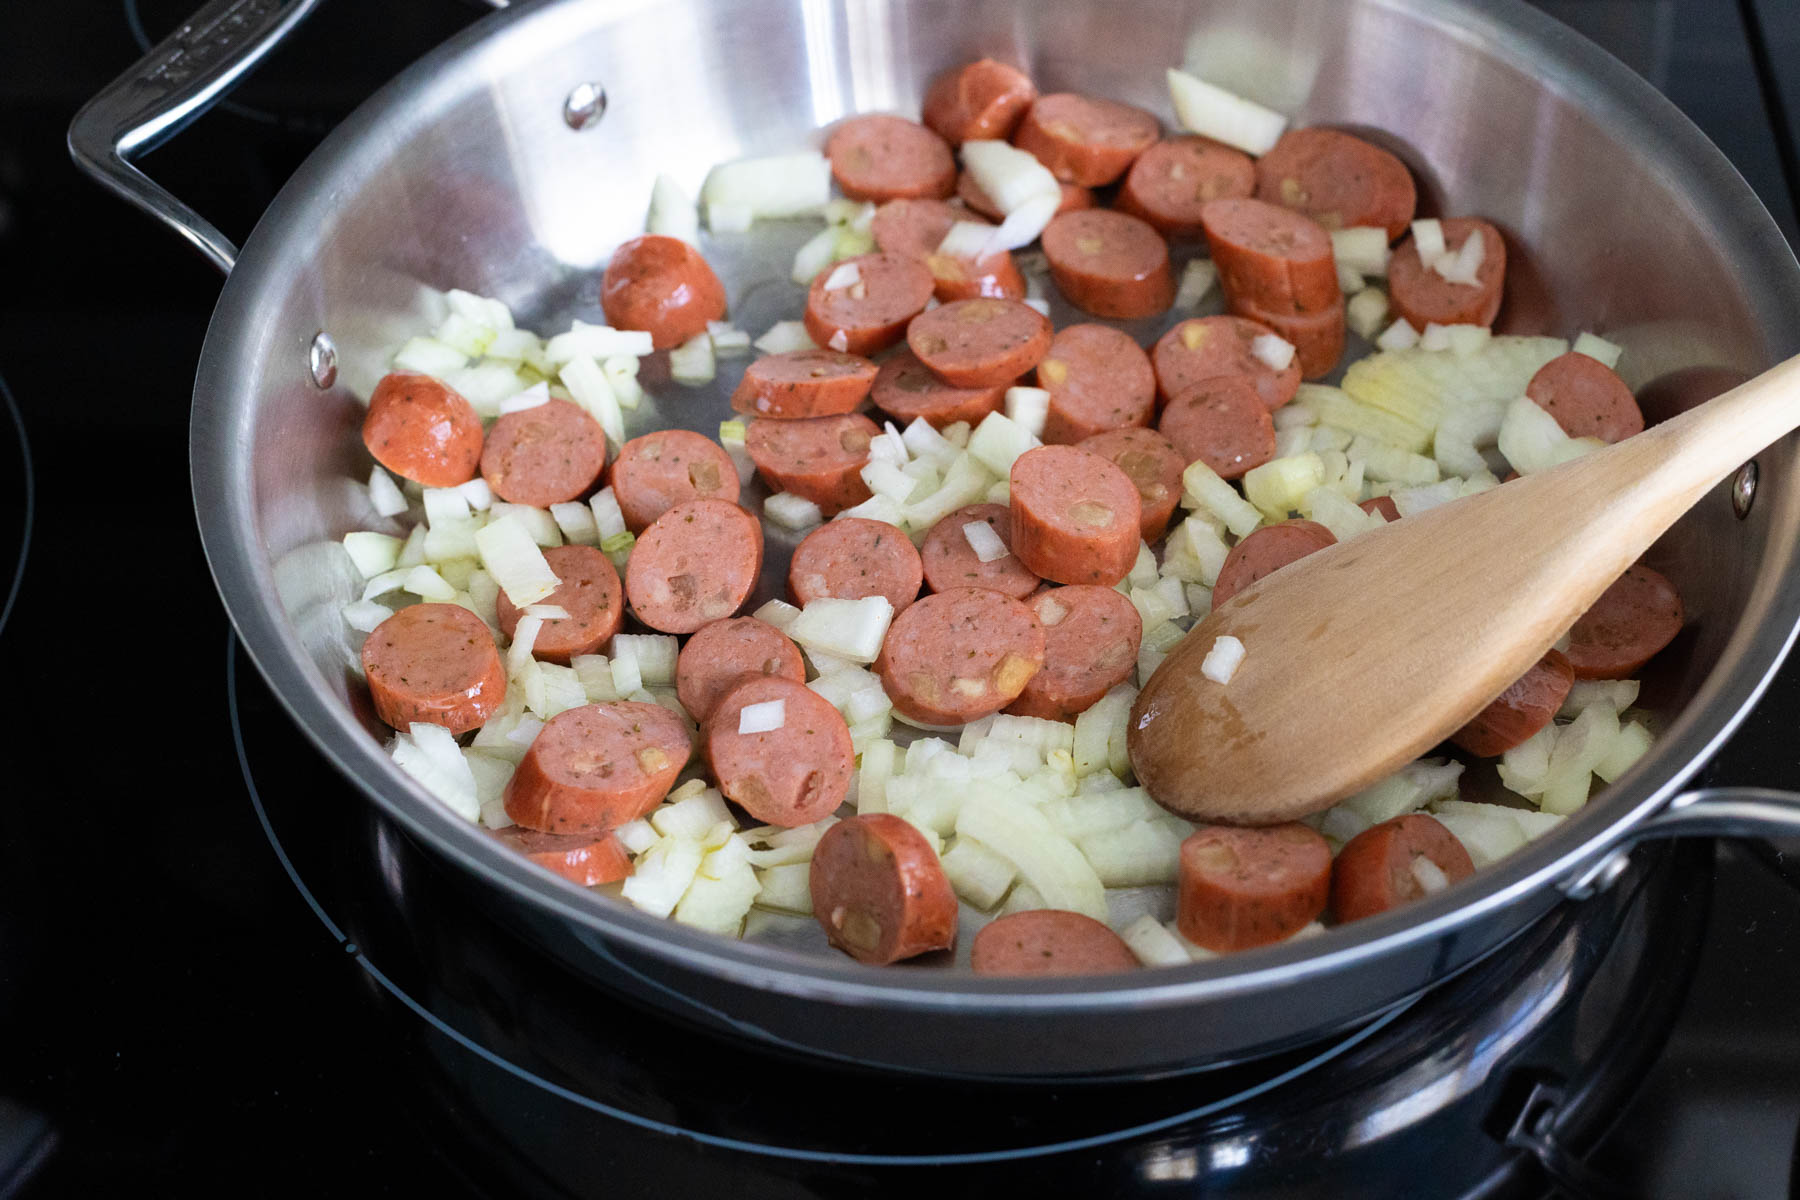 The sliced chicken sausage and chopped onions are browning in a large skillet.